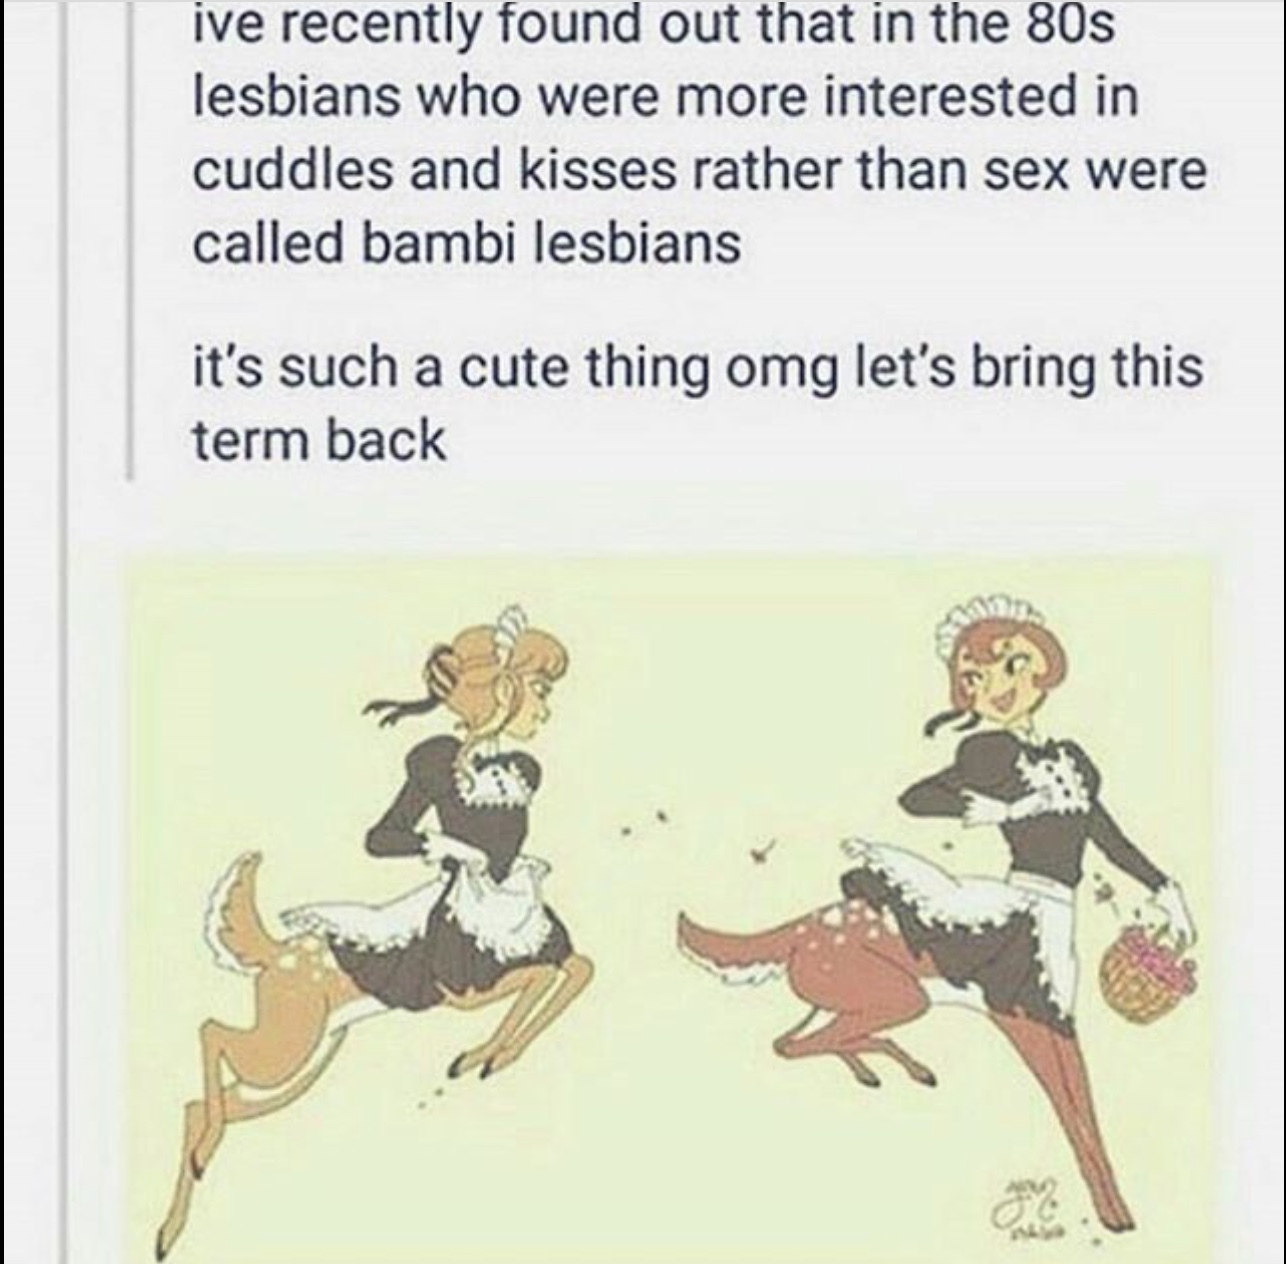 Bambi lesbians are the only good lesbians - meme